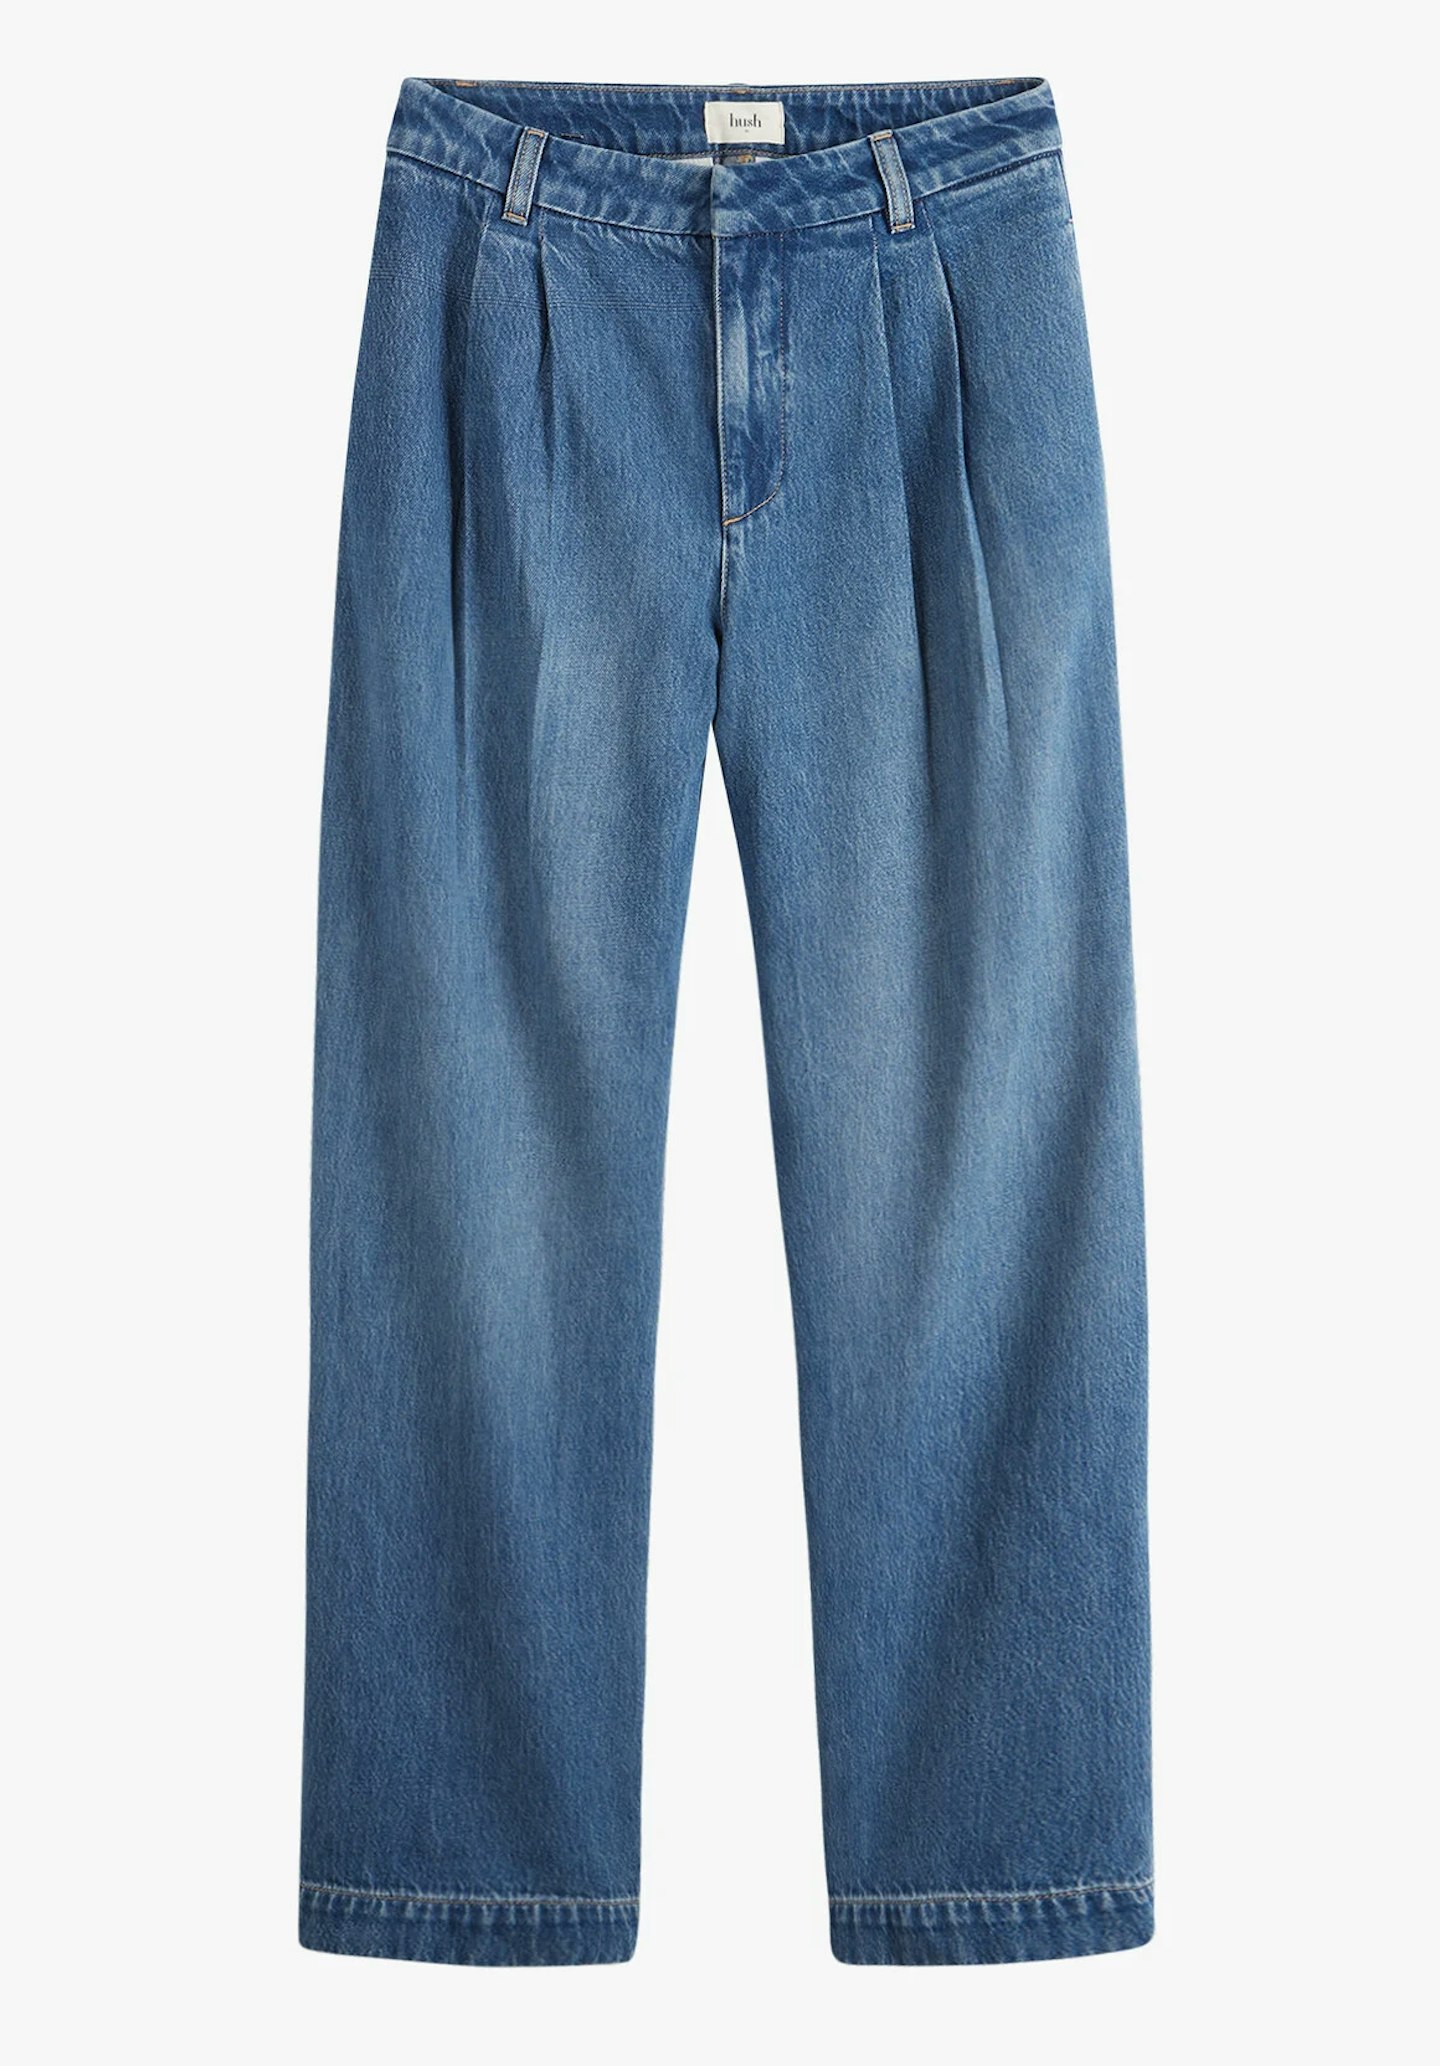 Hush's Wide Leg Jeans Are Back In Stock